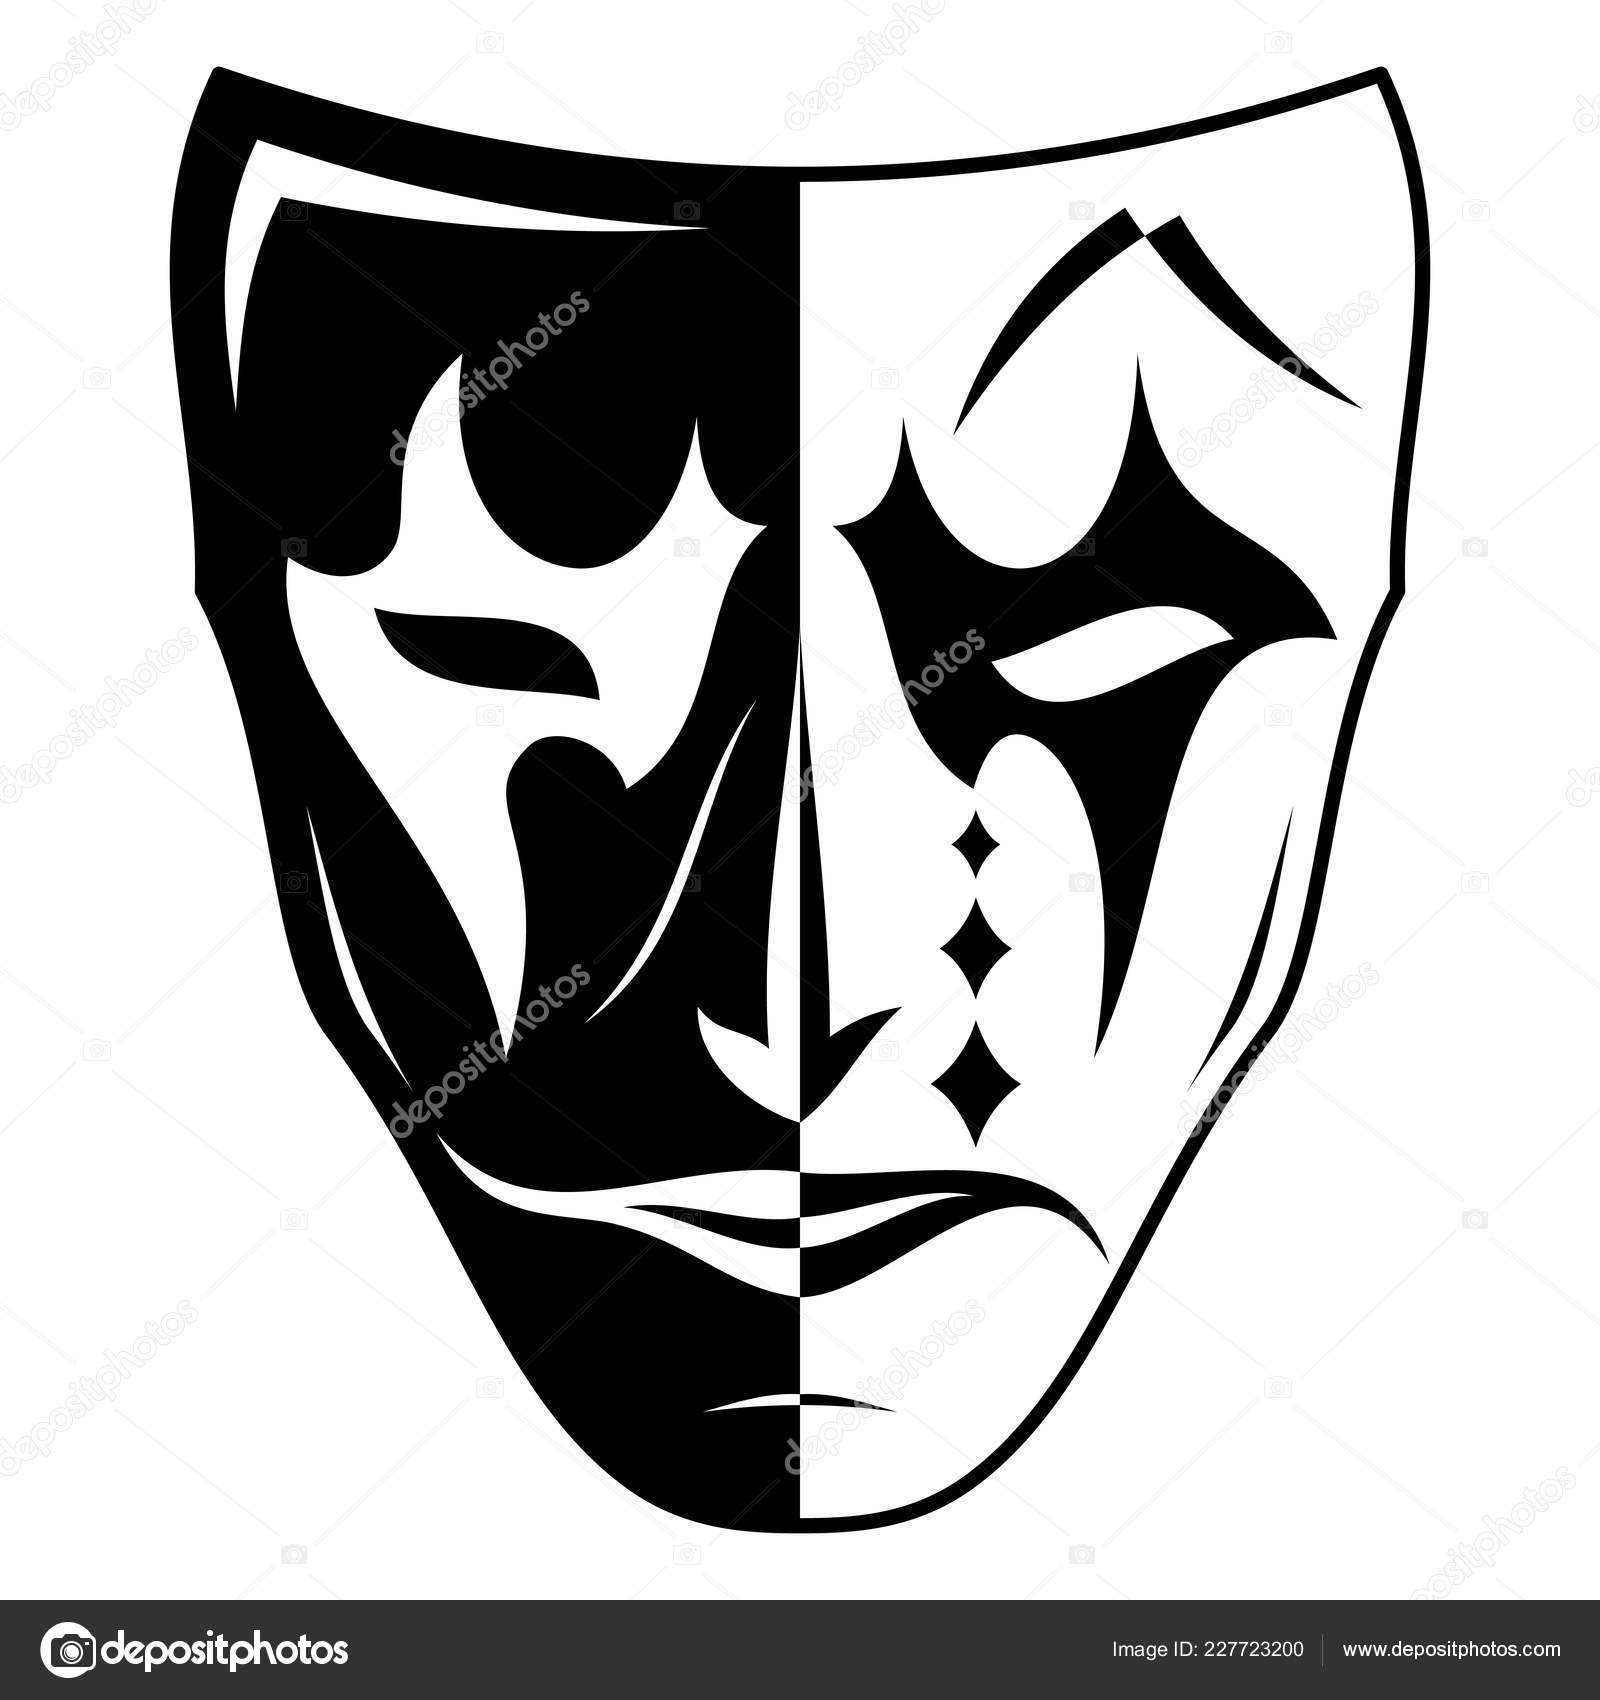 Good And Evil Mask Tattoos Vector Image Theatrical Mask Two Parties Black White Good Evil Stock Vector C Balashovmihail38 Gmail Com